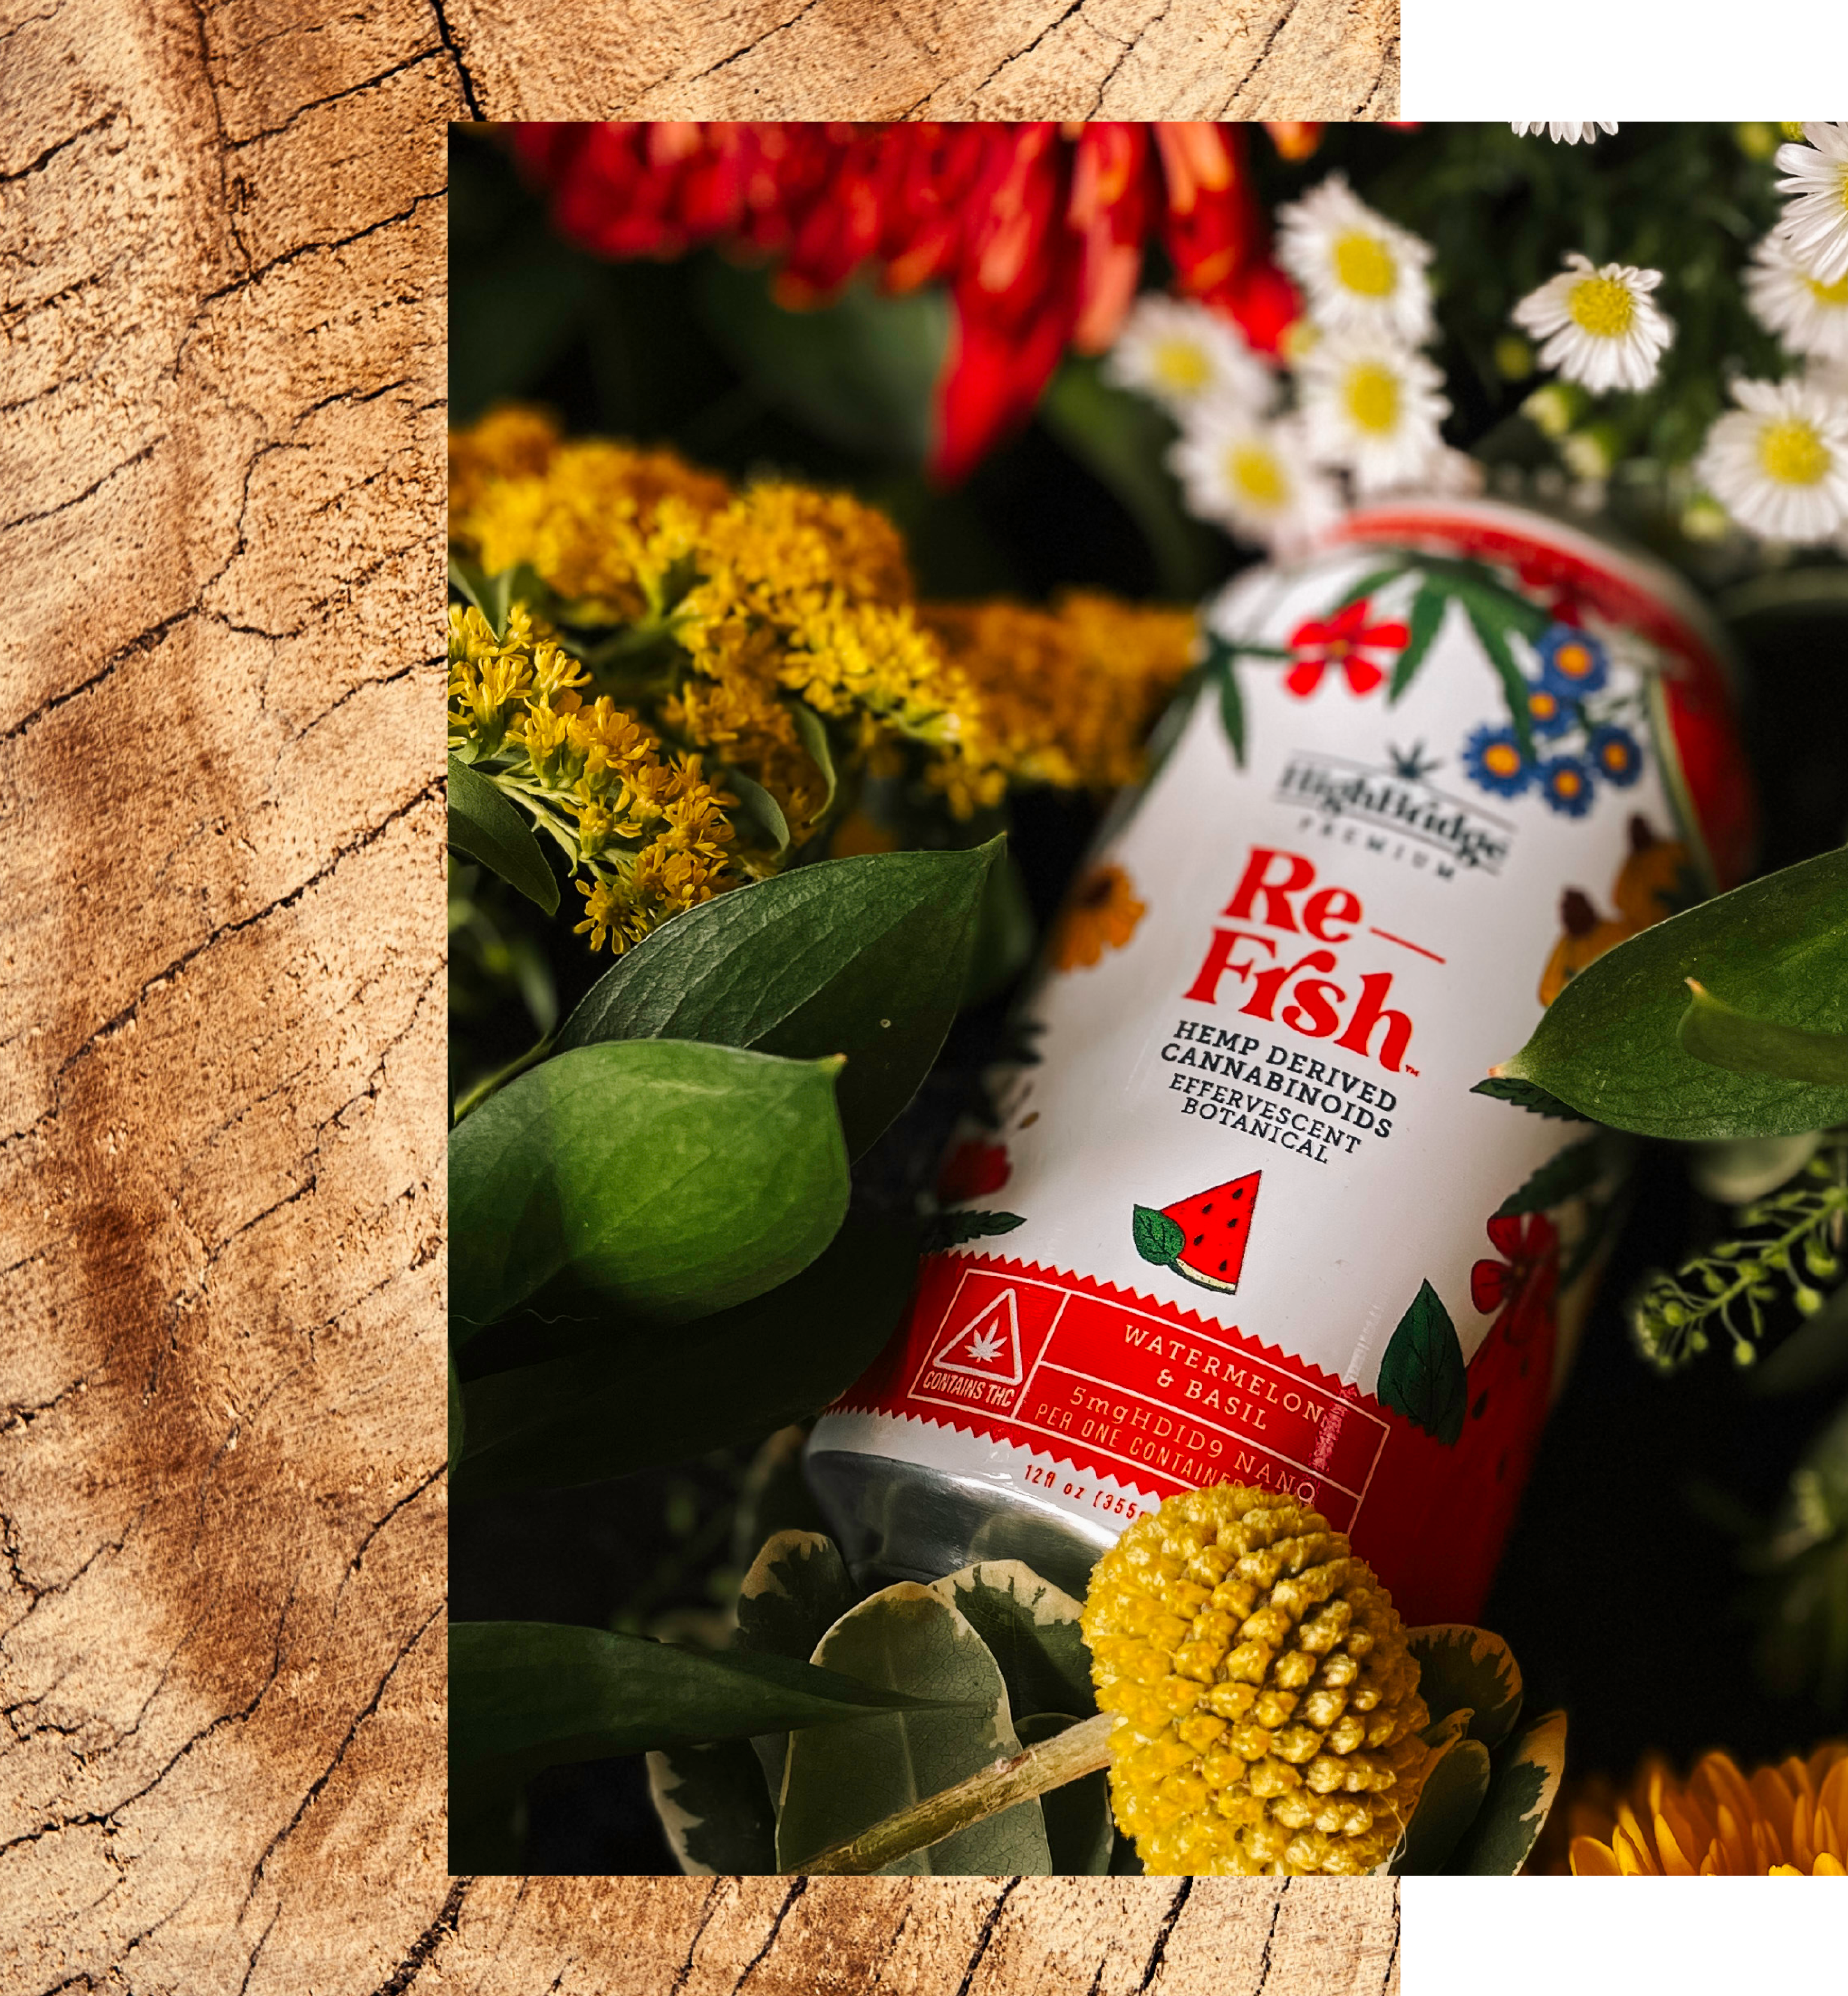 A can of HighBridge Premium's effervescent botanical, ReFrsh, surrounded by fall flowers